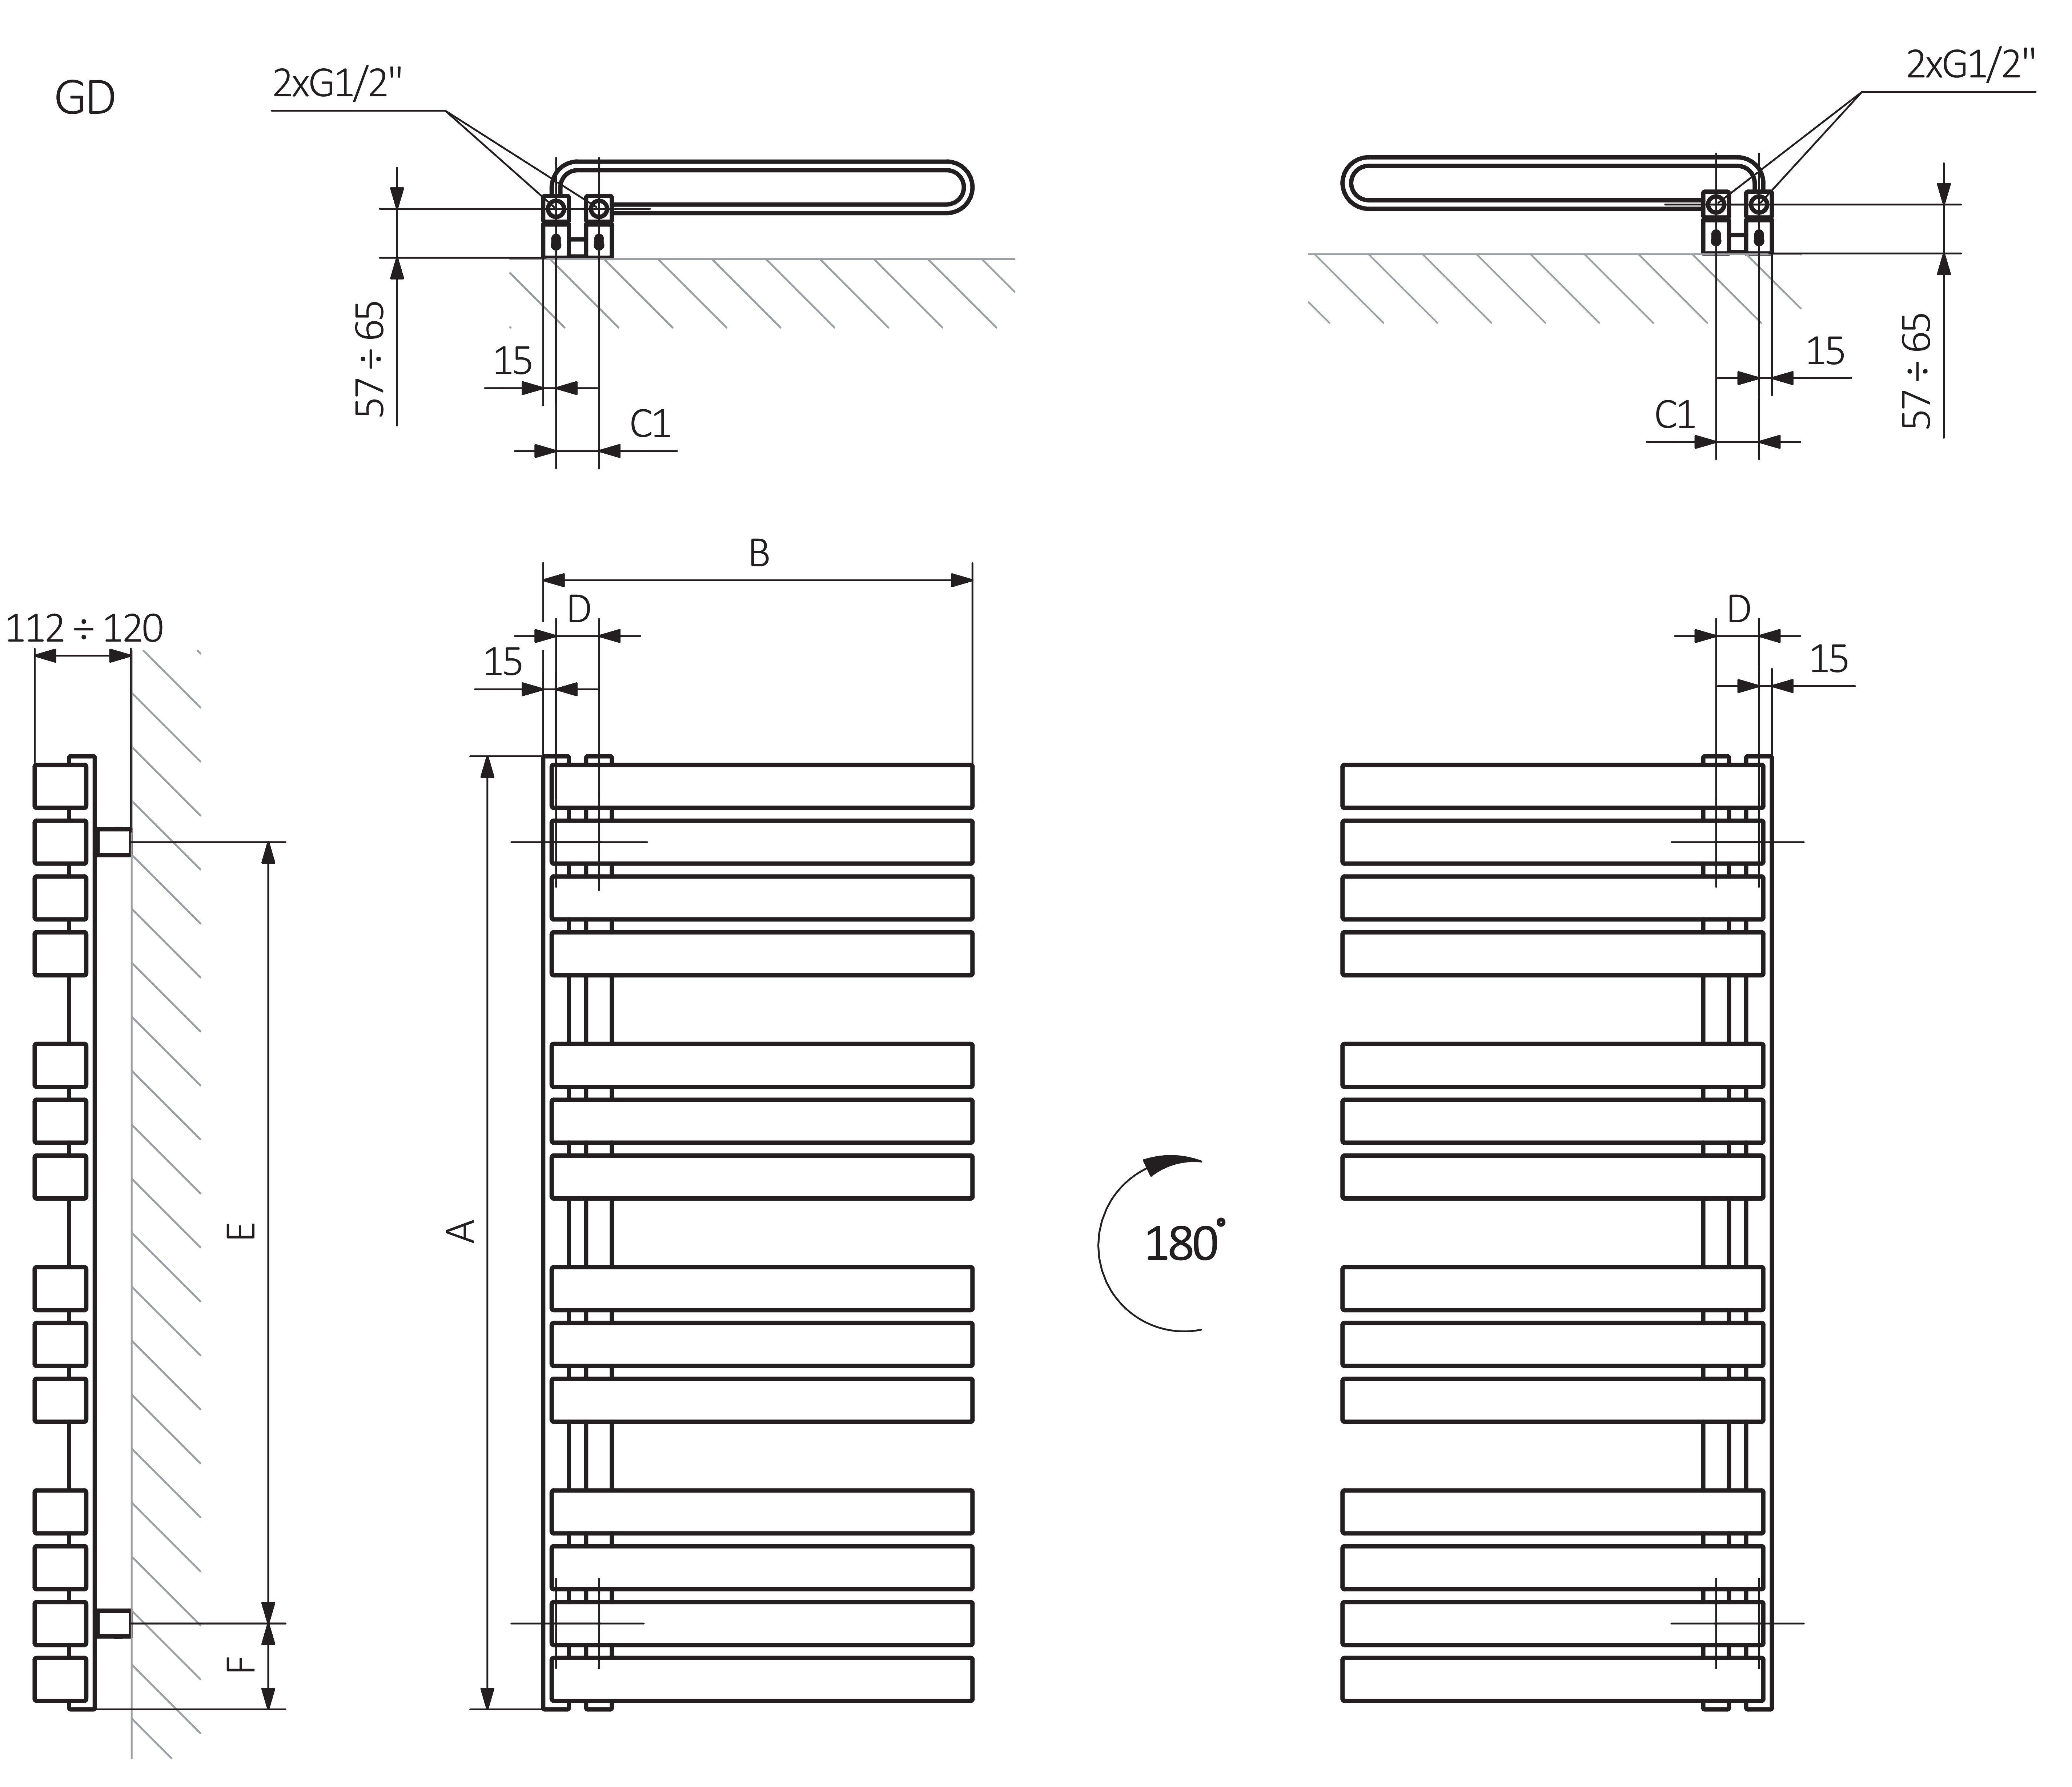 A - height B - width C1-C5 - connection spacing D - distance between fixings horizontally E - distance between attachments vertically F - distance from the lower axle of fixings to the bottom edge of the collector
